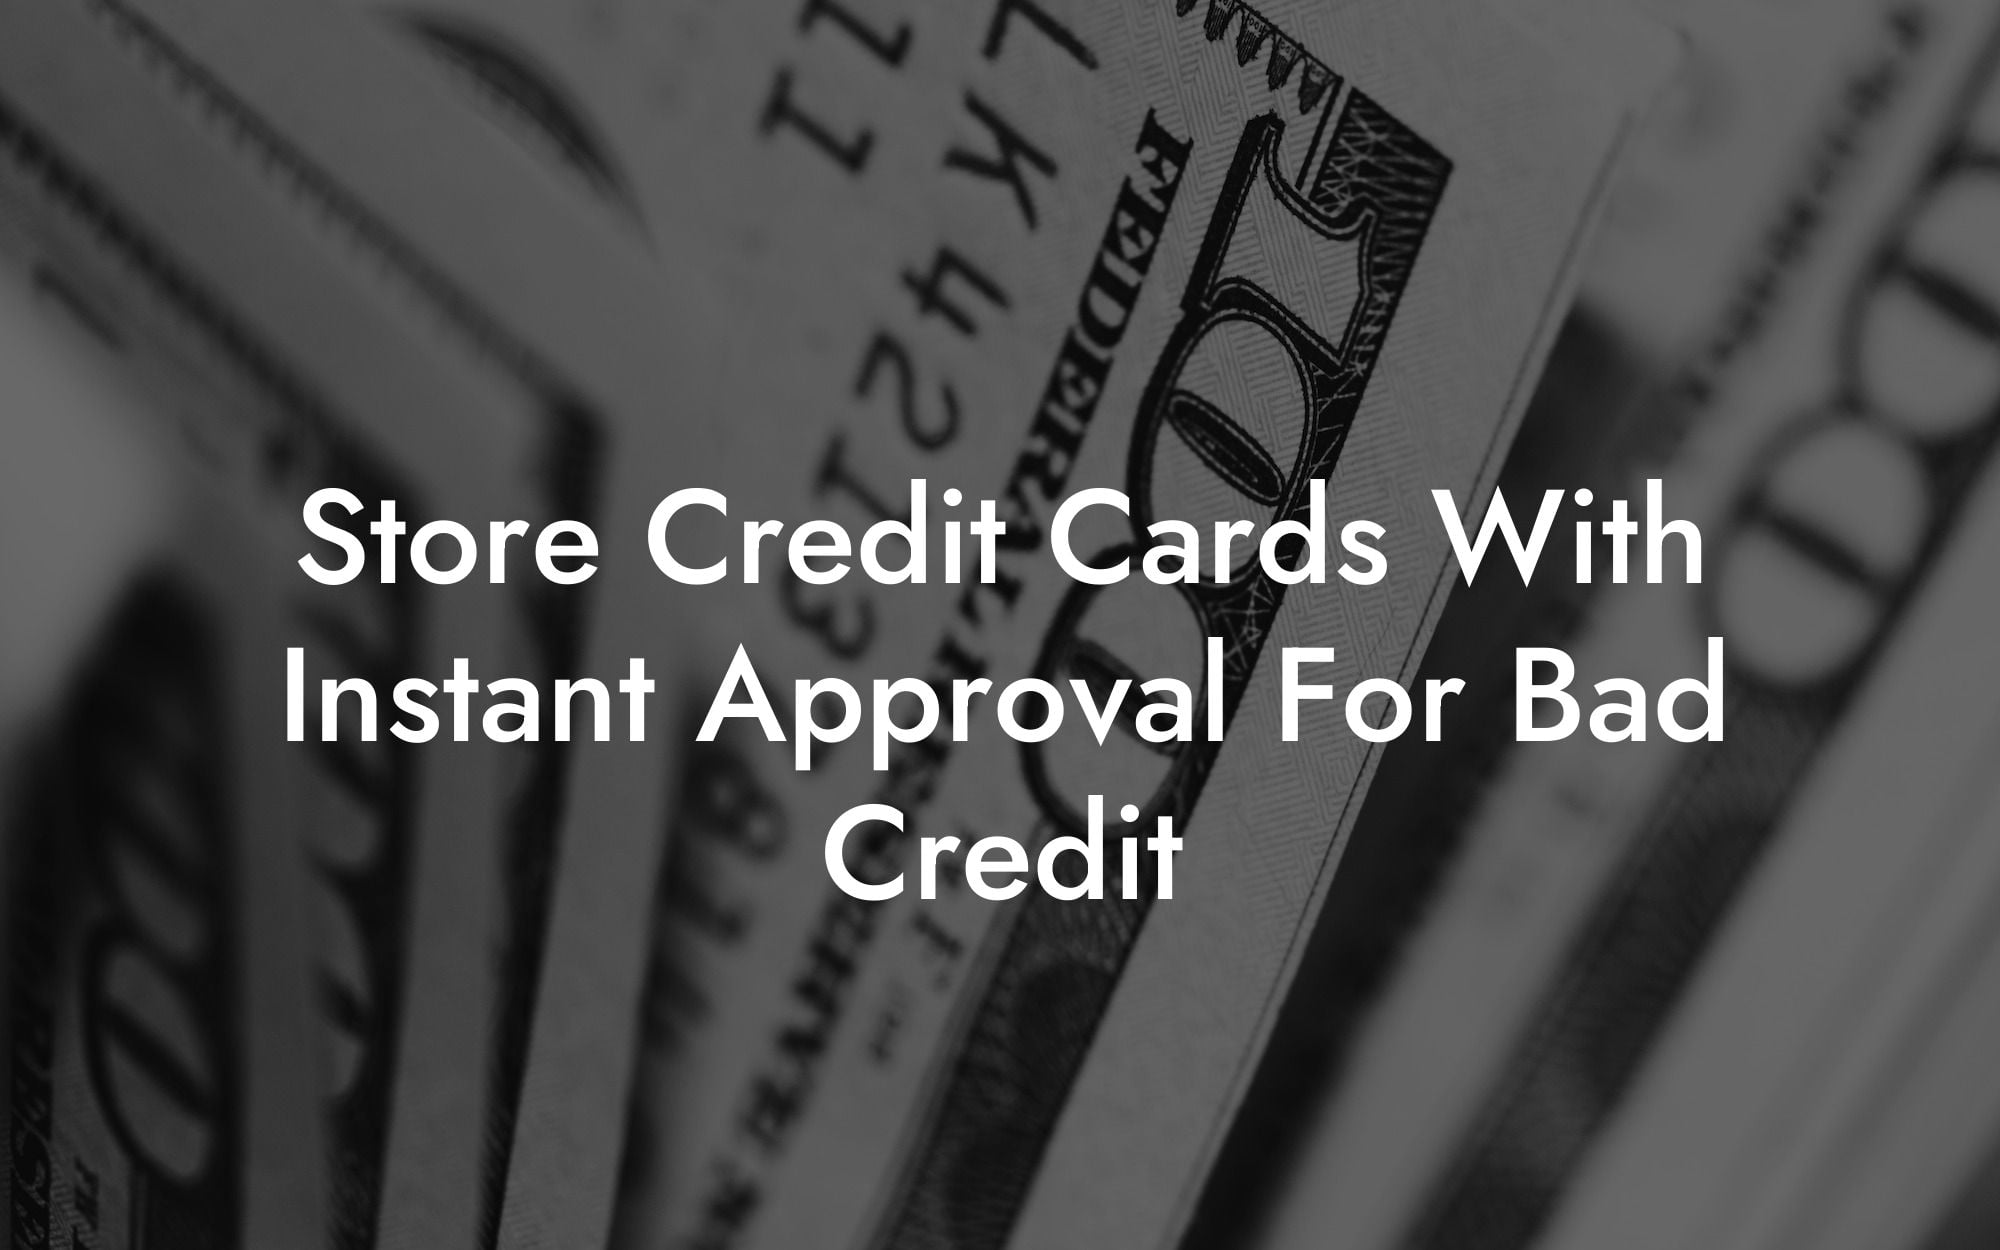 Store Credit Cards With Instant Approval For Bad Credit